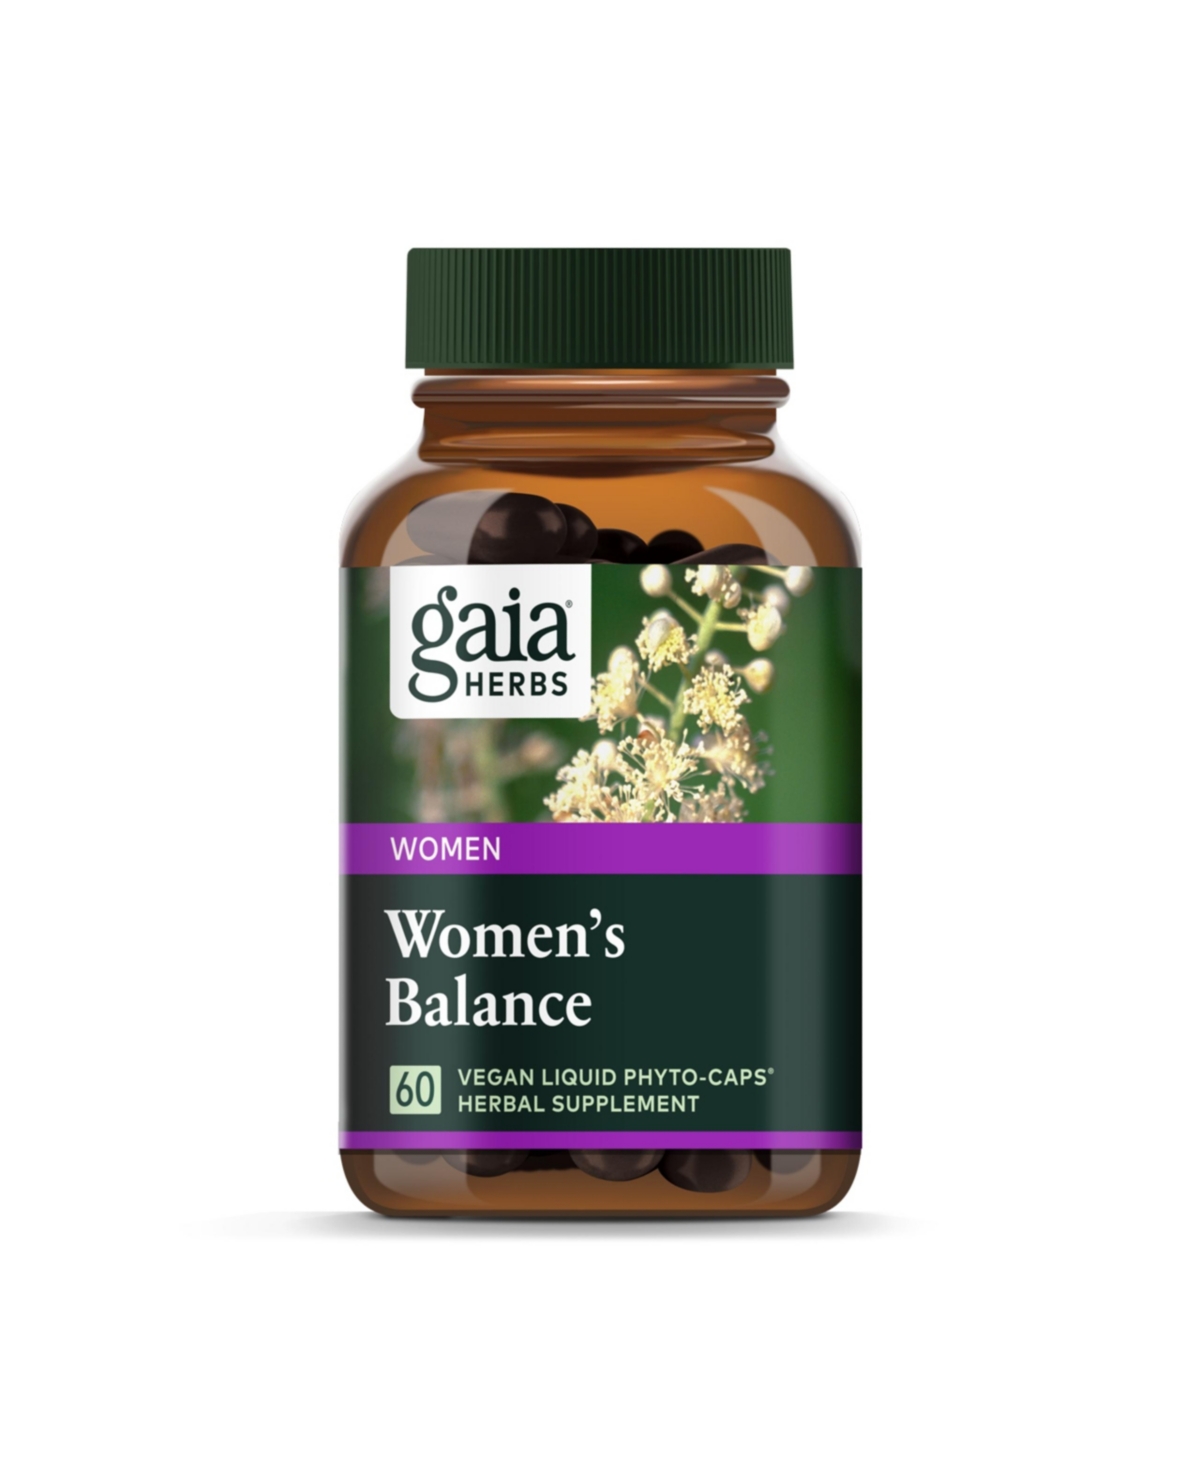 Women's Balance - Helps Maintain Healthy Hormone Balance and Well-Being for Women - With Vitex, Black Cohosh, St. John's Wort, and Oats - 6